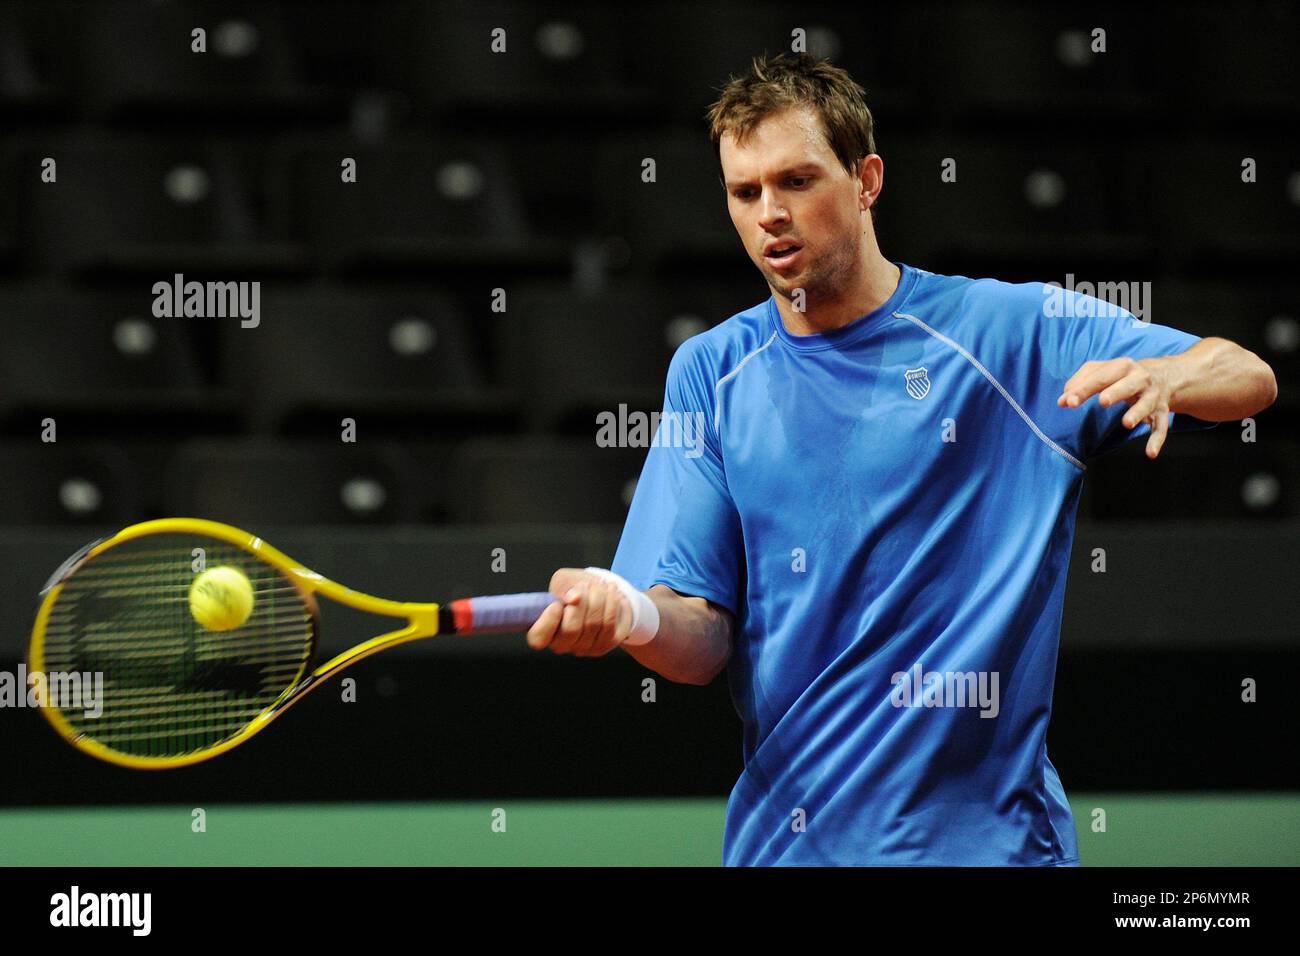 US Davis Cup tennis player Mike Bryan plays a ball during a training  session in the Forum Arena in Fribourg, Switzerland, Monday, Feb. 6, 2012.  Switzerland faces US the World Group first